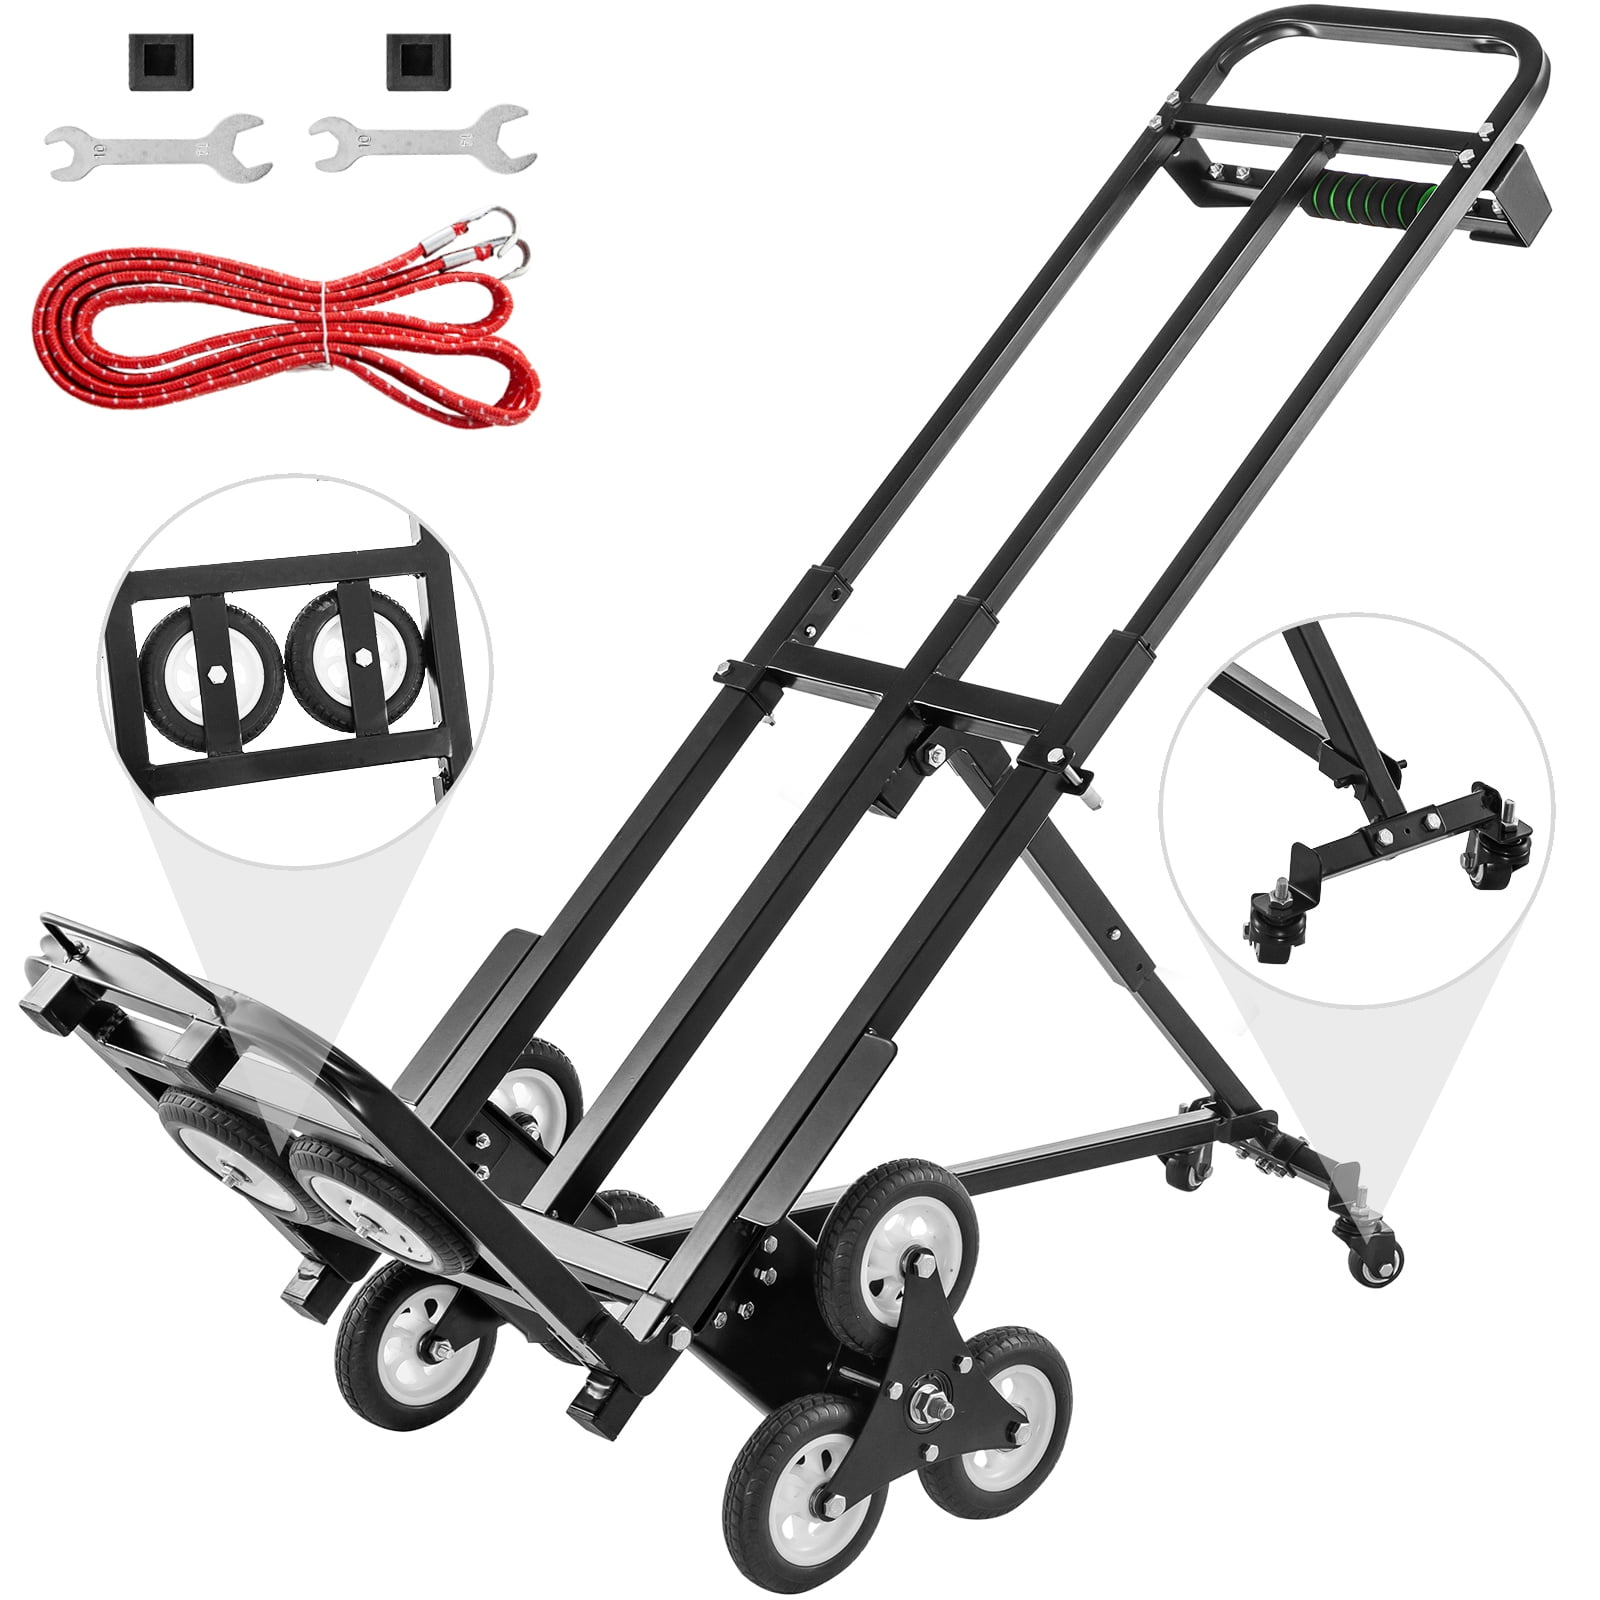 Portable Stair Climbing Climber Hand Truck Dolly Cart Trolley Basket CartUtility 